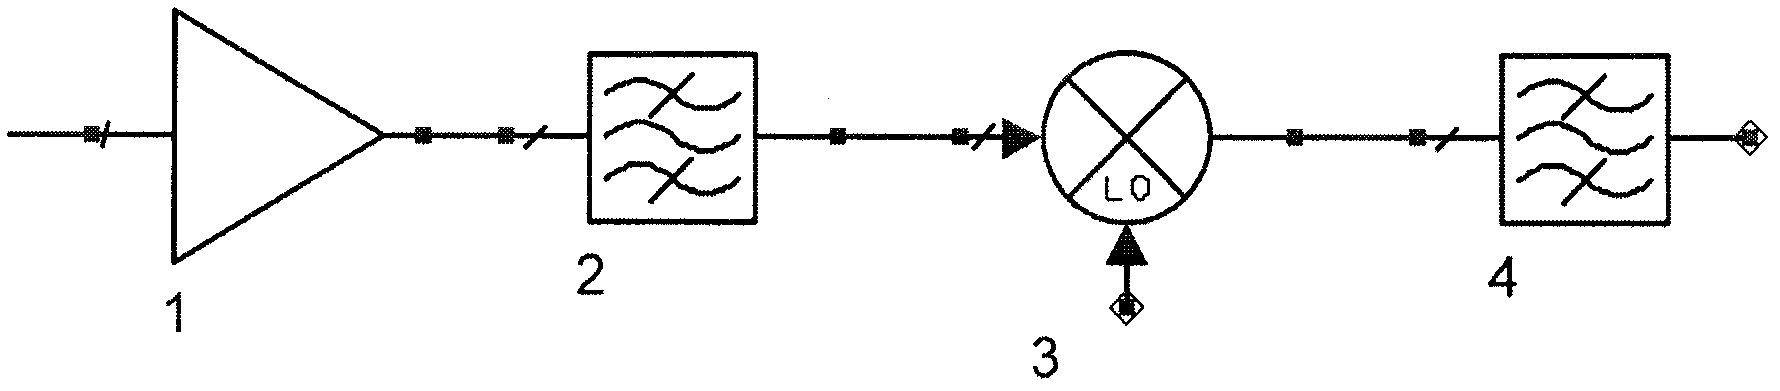 Ultrahigh frequency high image rejection filter